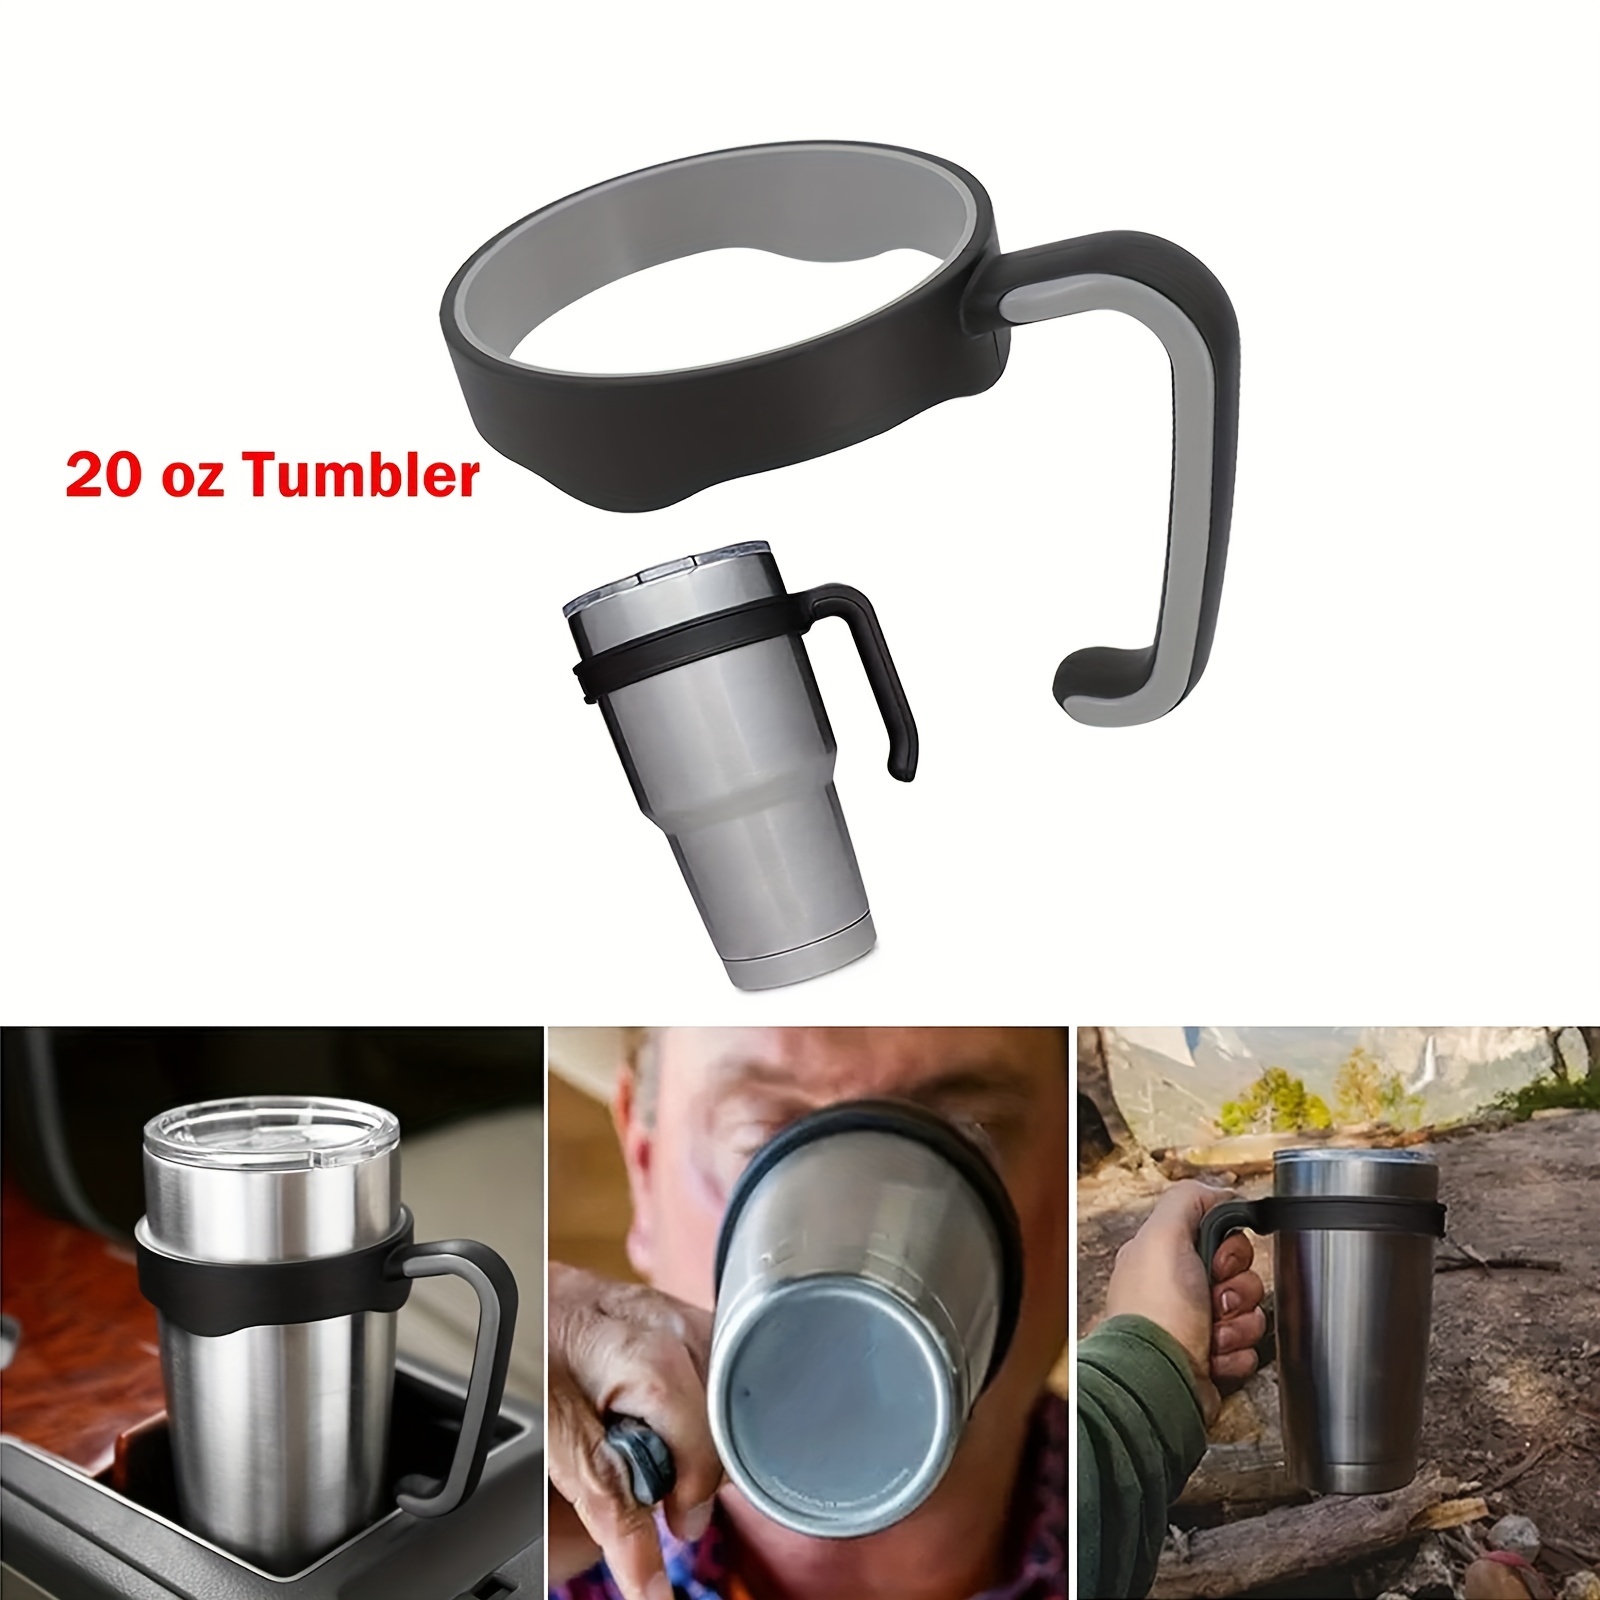 Handle for 20 Oz Tumblers Fits YETI Rambler, Ozark Trial and Many